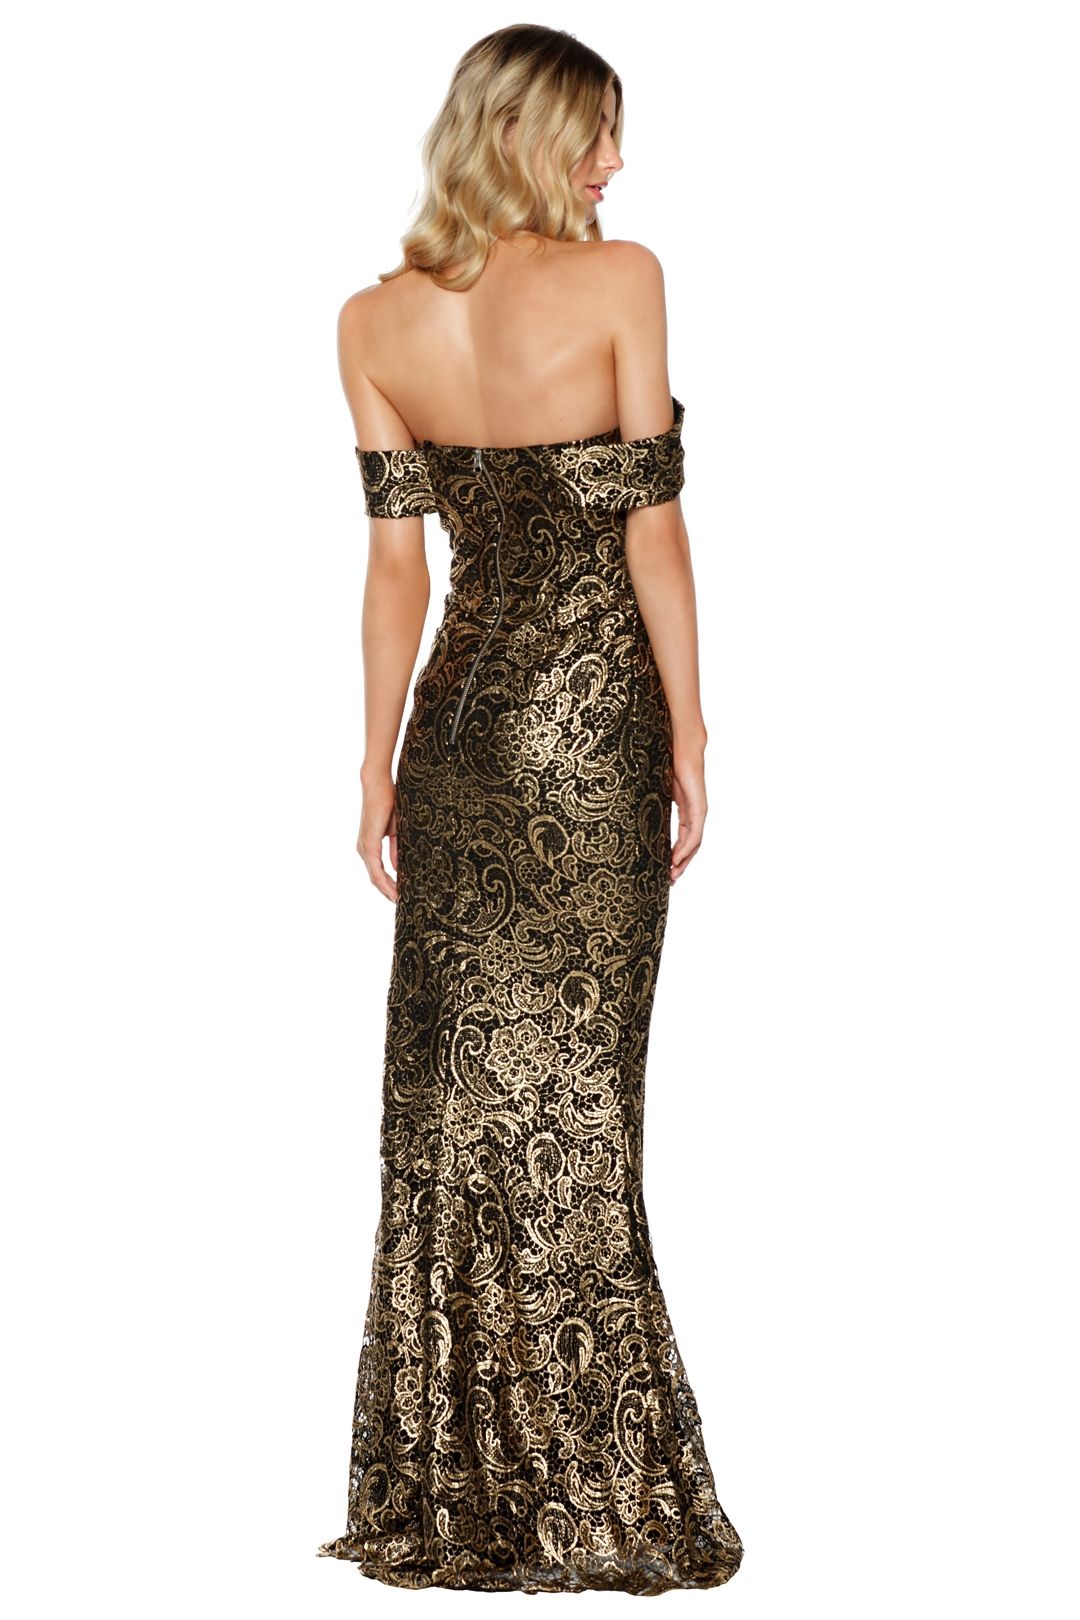 Grace and Hart - Gold Rush Off the Shoulder Gown - Gold - Back